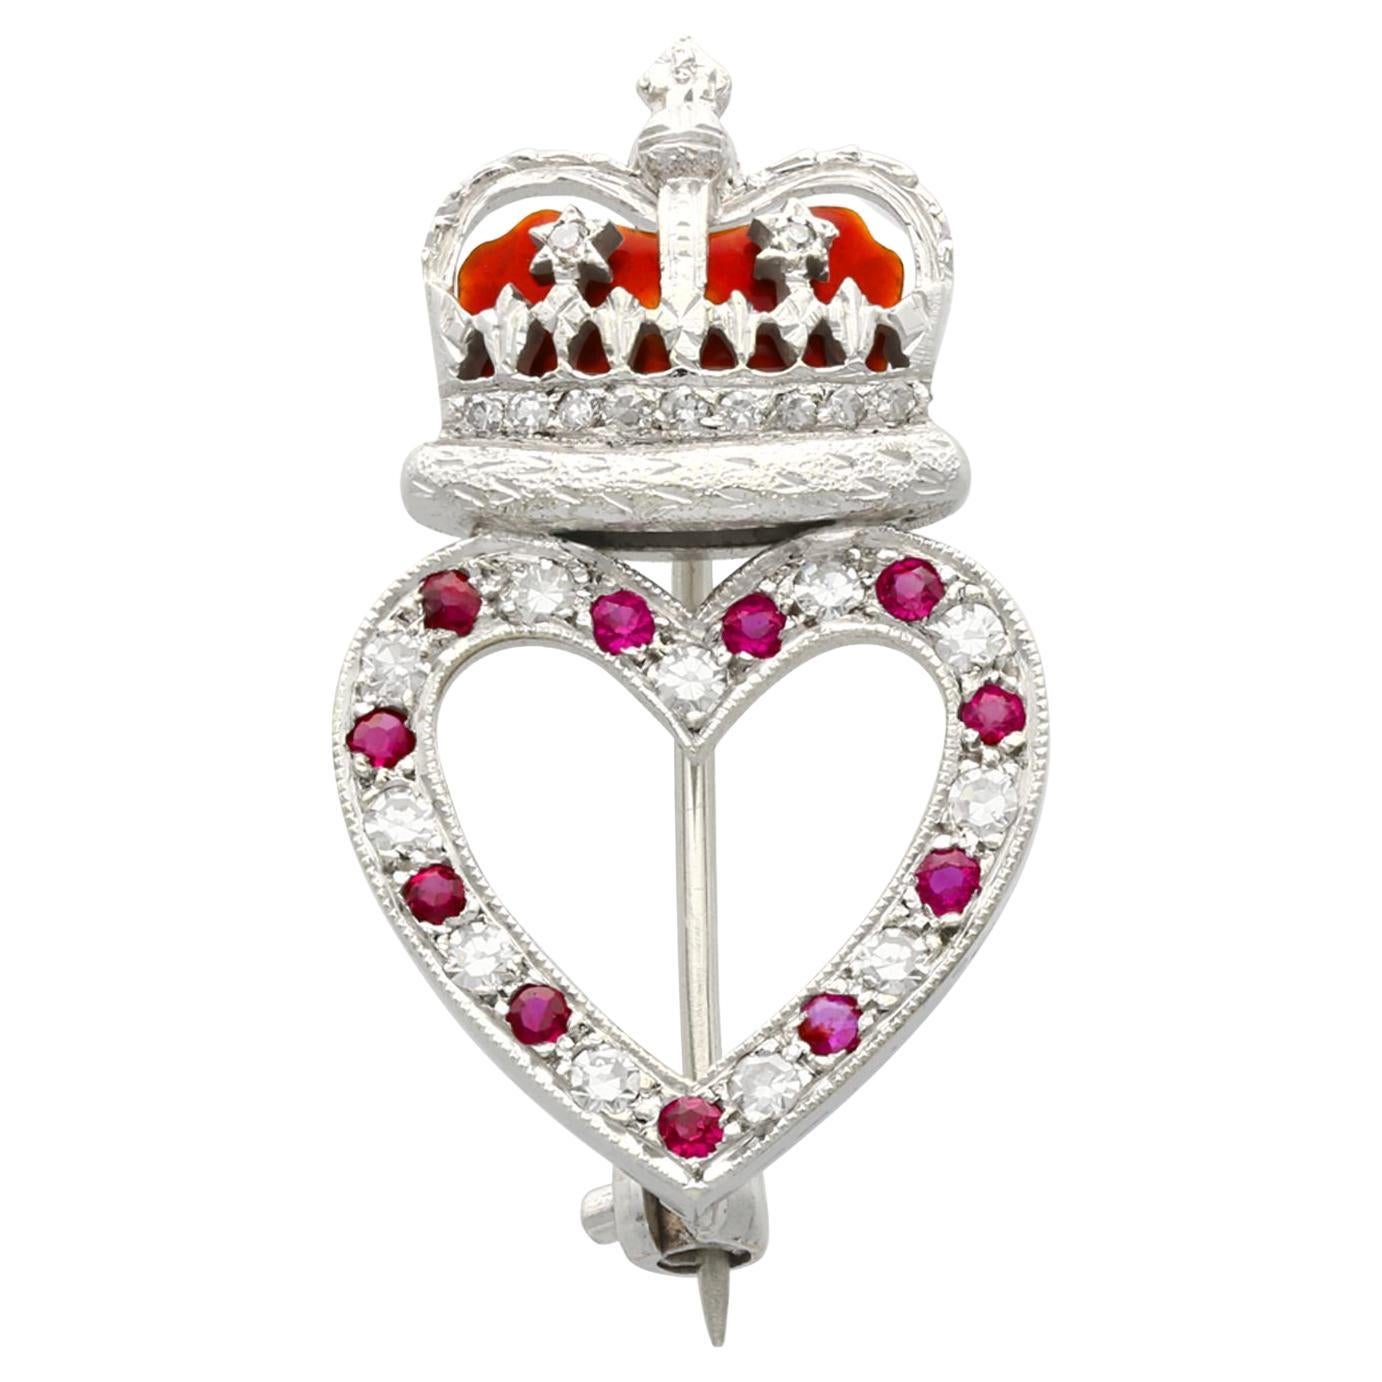 Vintage 1955 Ruby and Diamond Enamel and White Gold Brooch